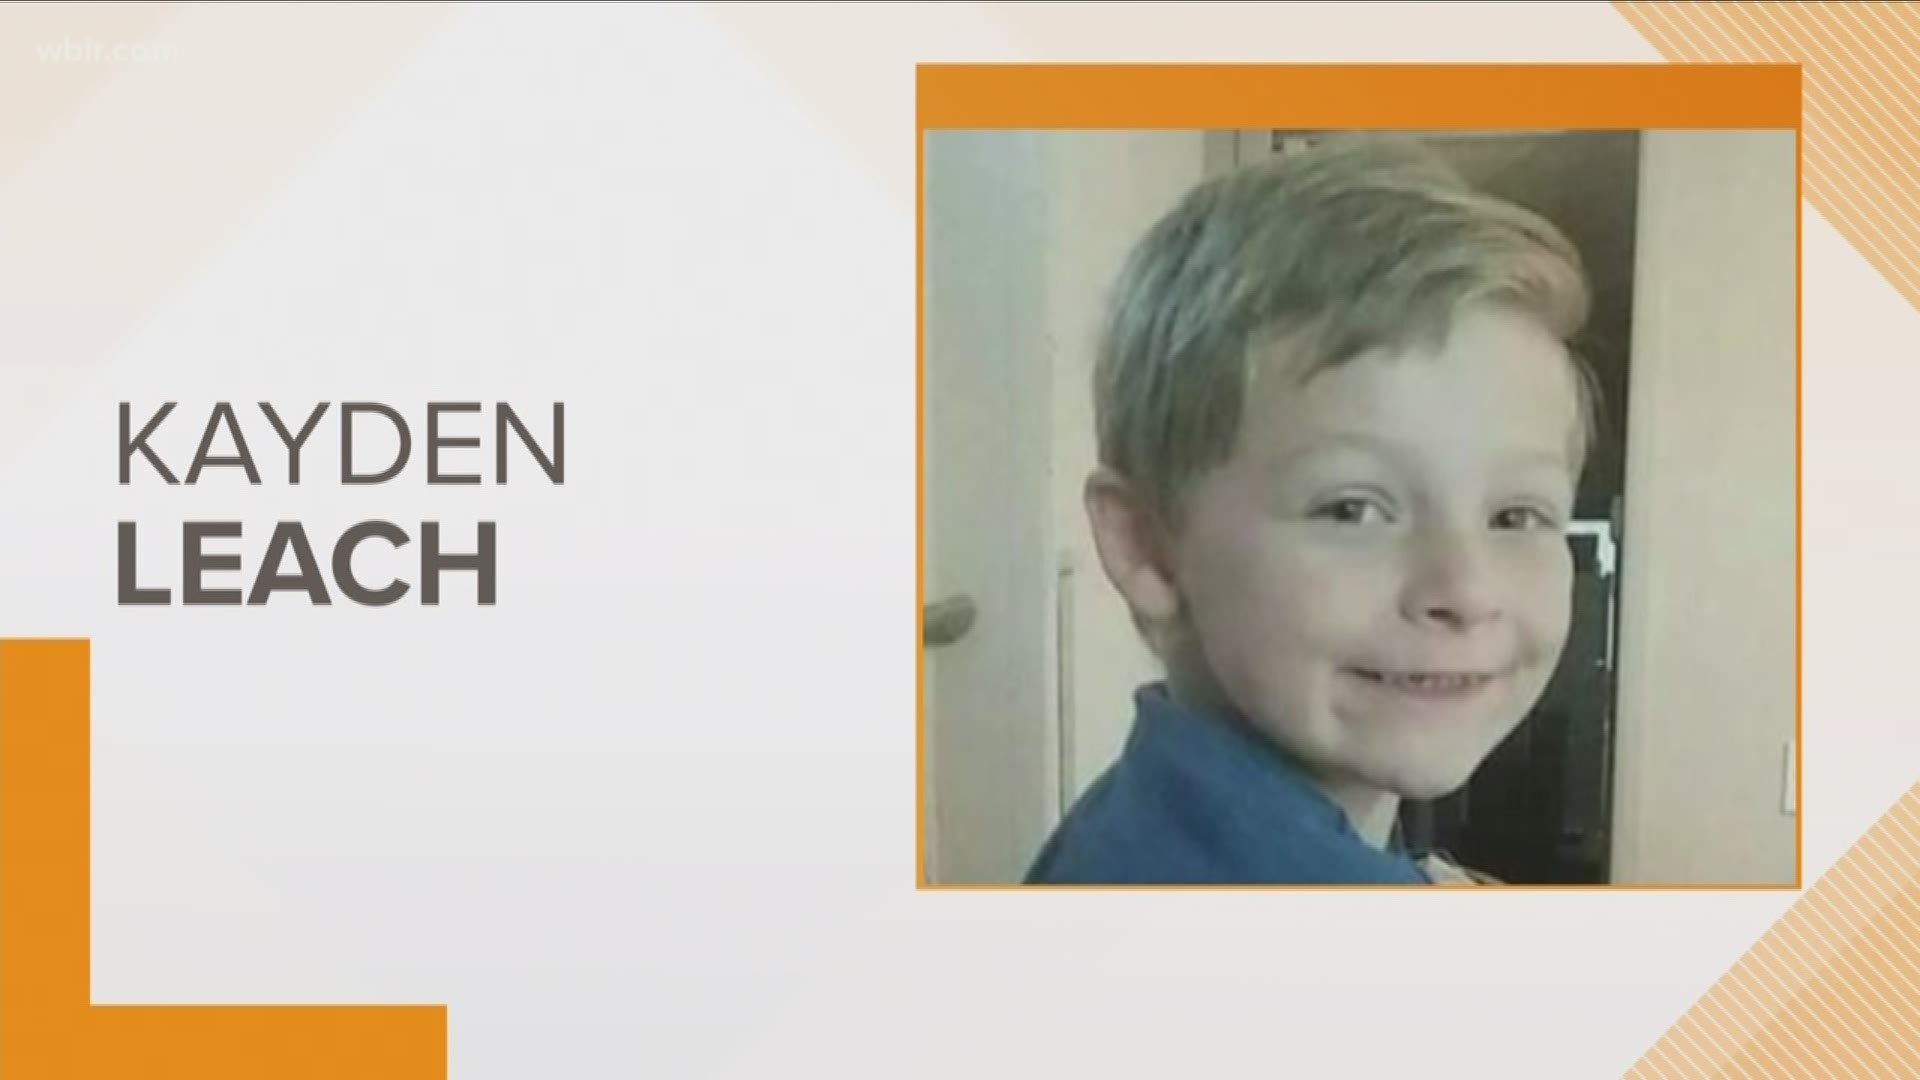 Authorities are looking for a 6-year-old boy who disappeared in Blount County Monday.